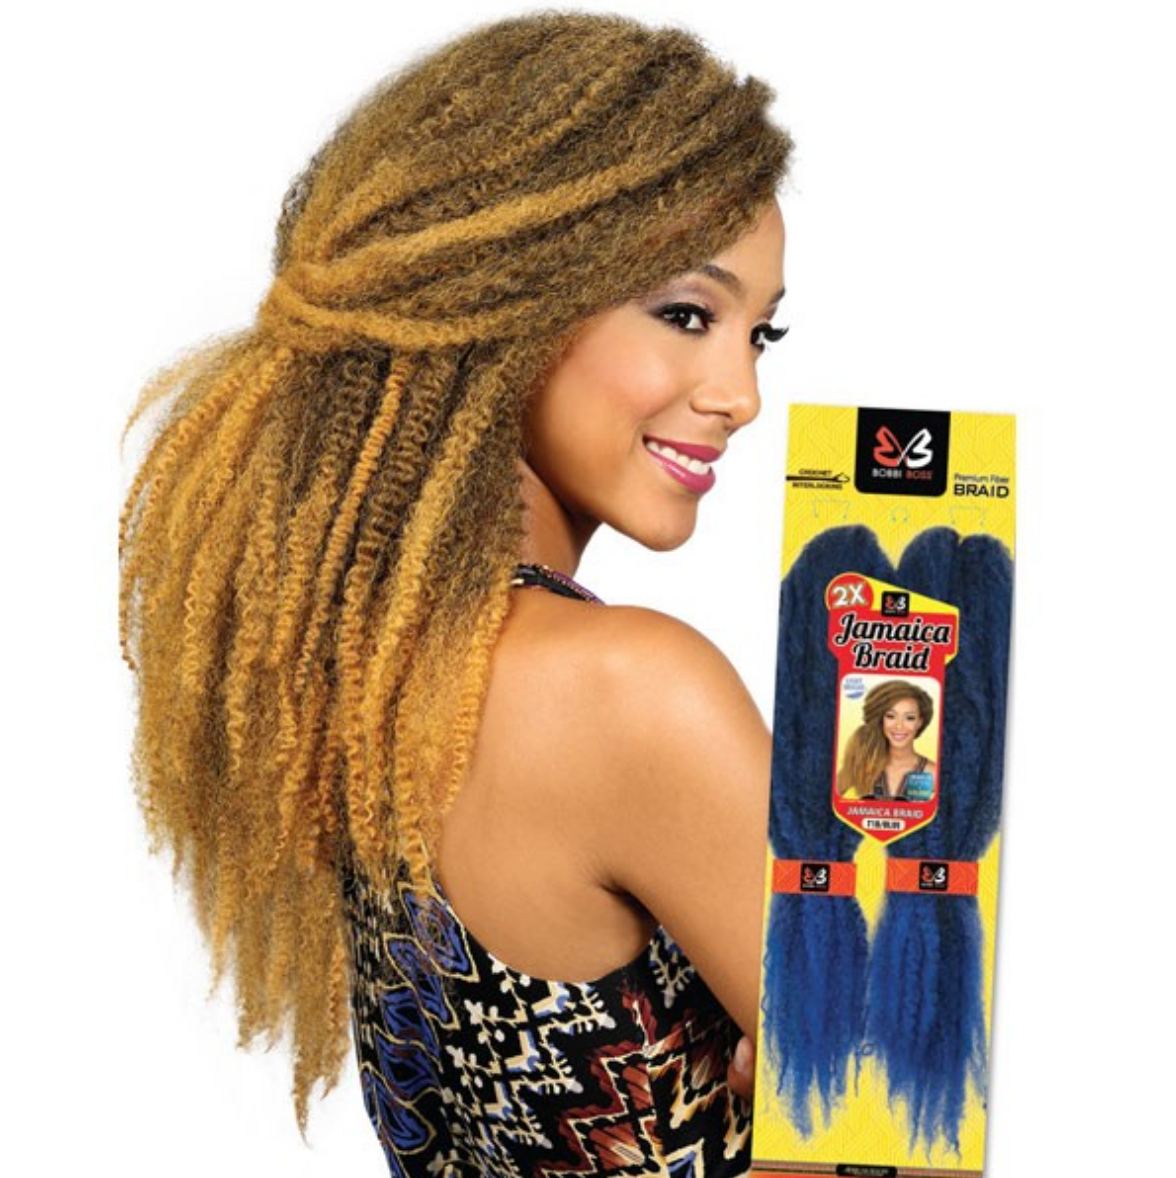 BOBBI BOSS SYNTHETIC HAIR AFRICAN ROOTS BRAID COLLECTION CROCHET 2X JAMAICA BRAID